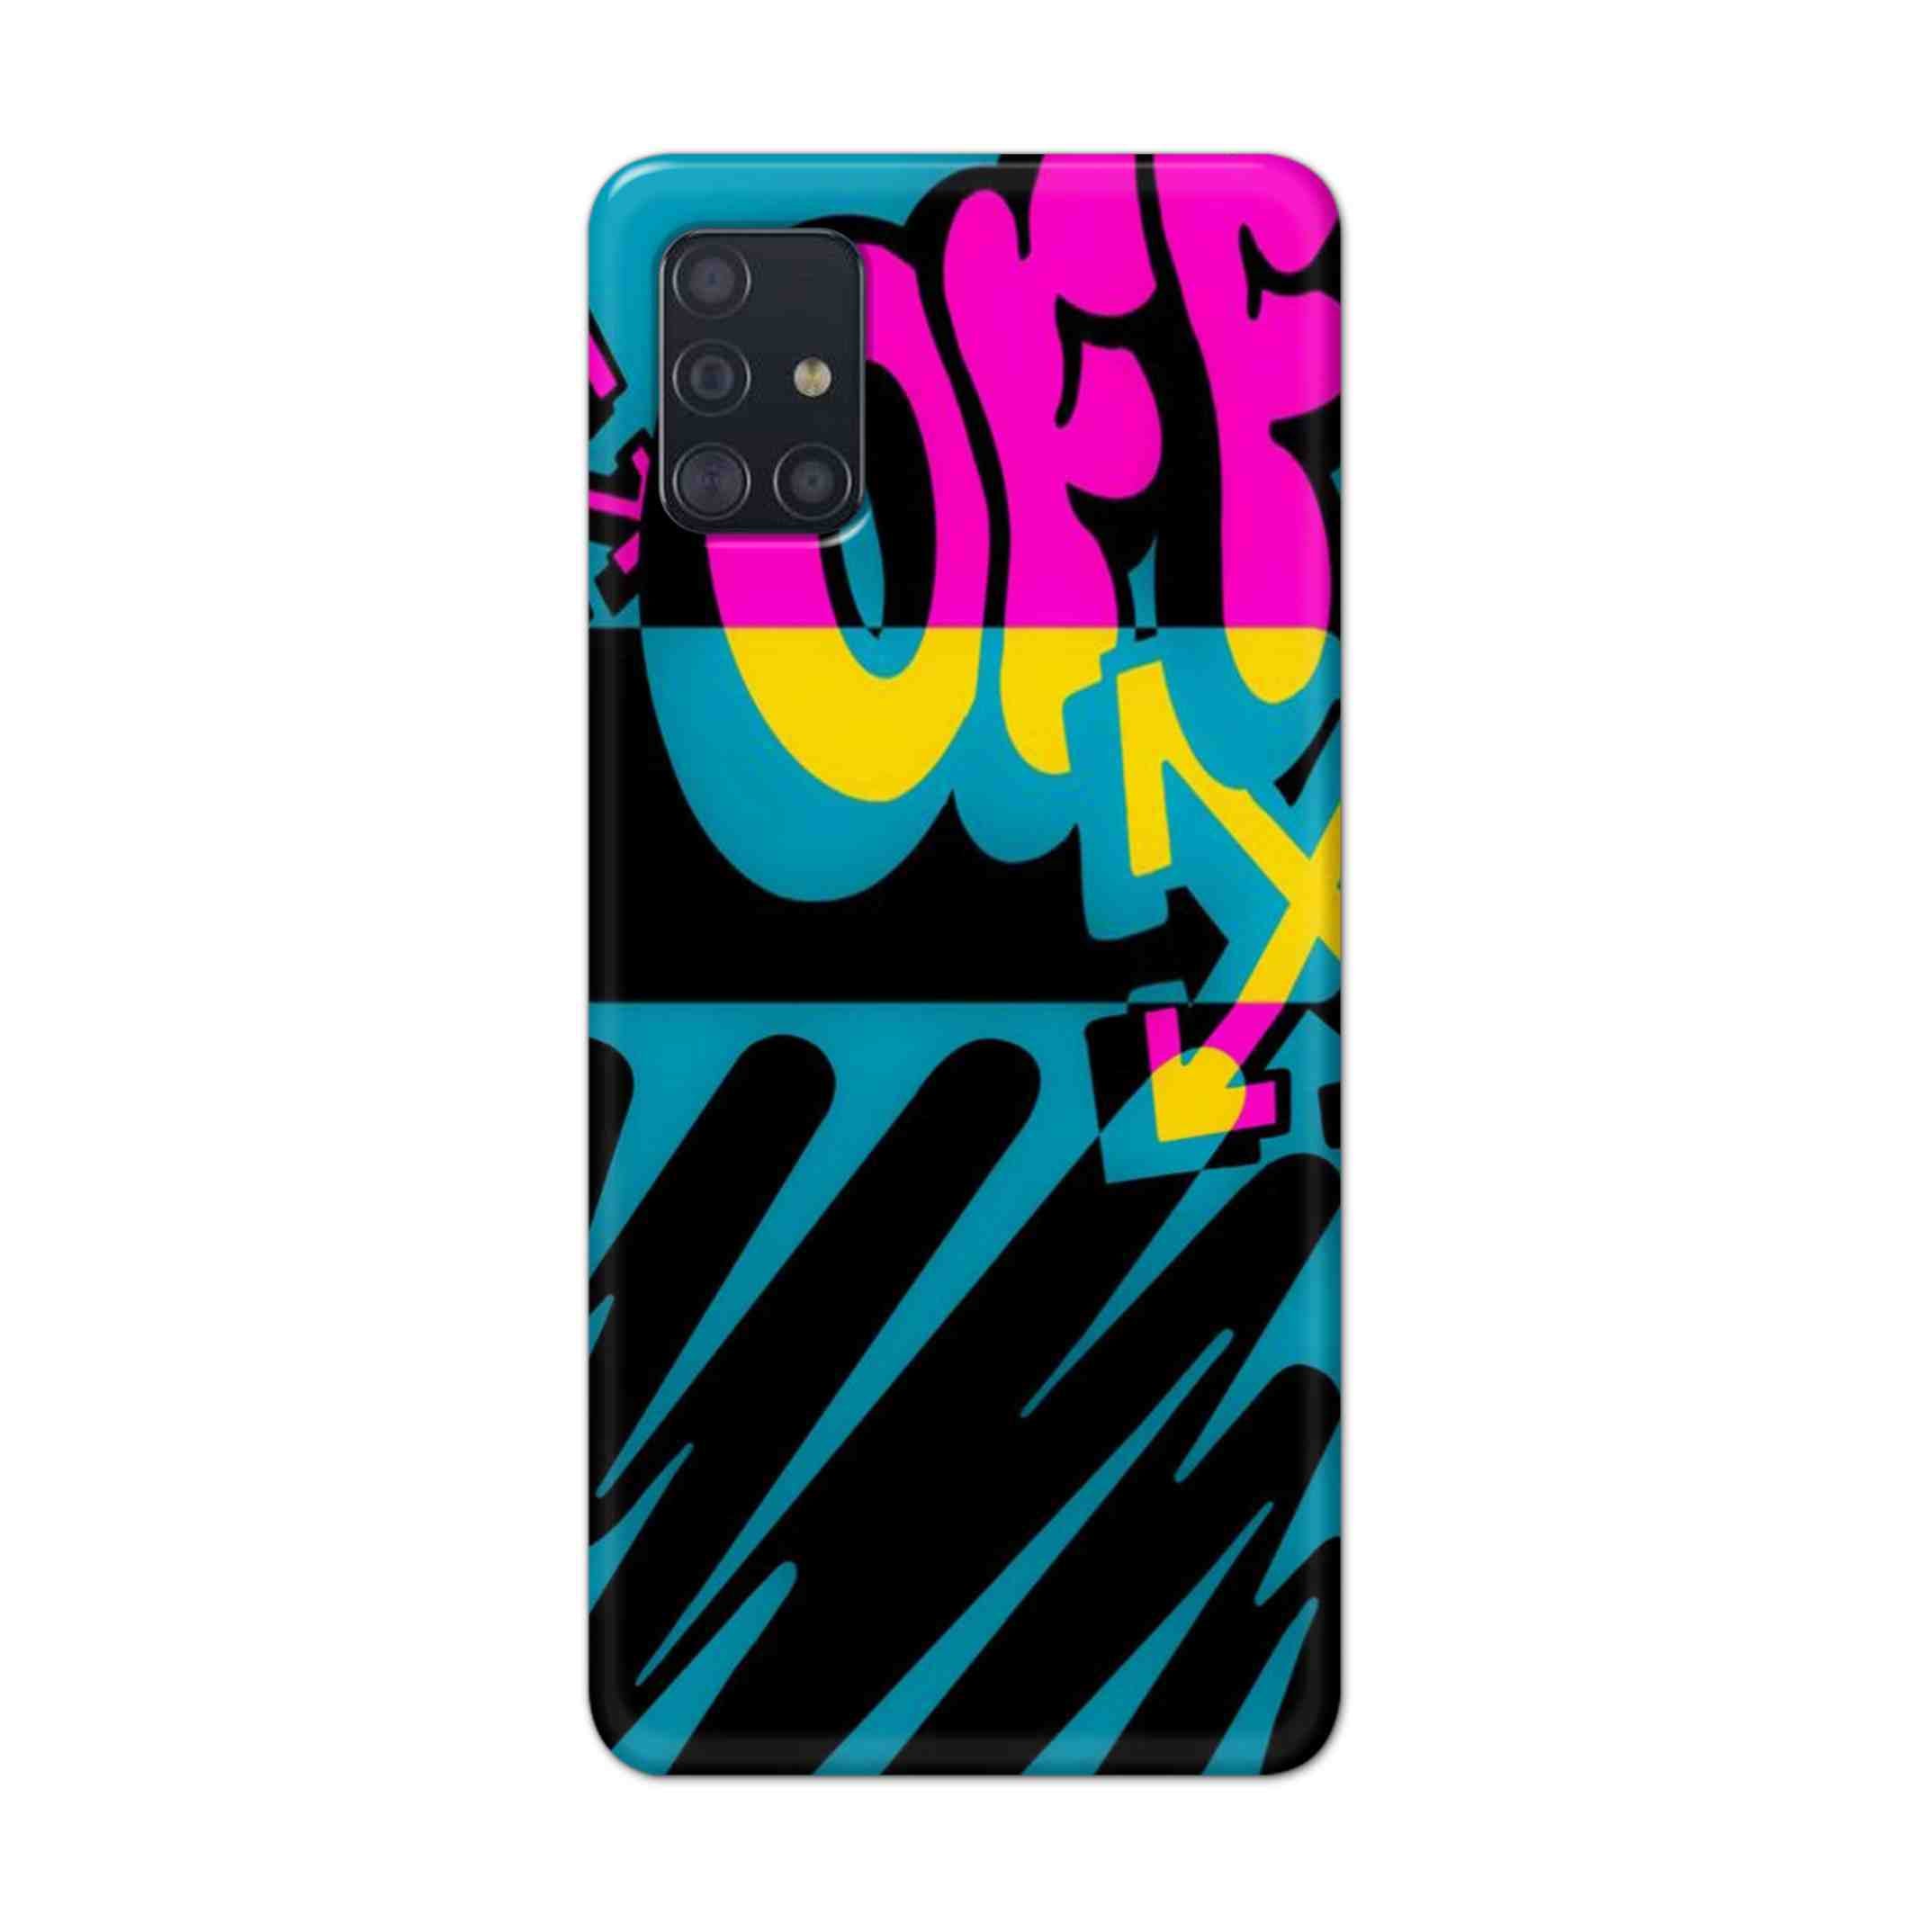 Buy Off Hard Back Mobile Phone Case Cover For Samsung Galaxy M31s Online